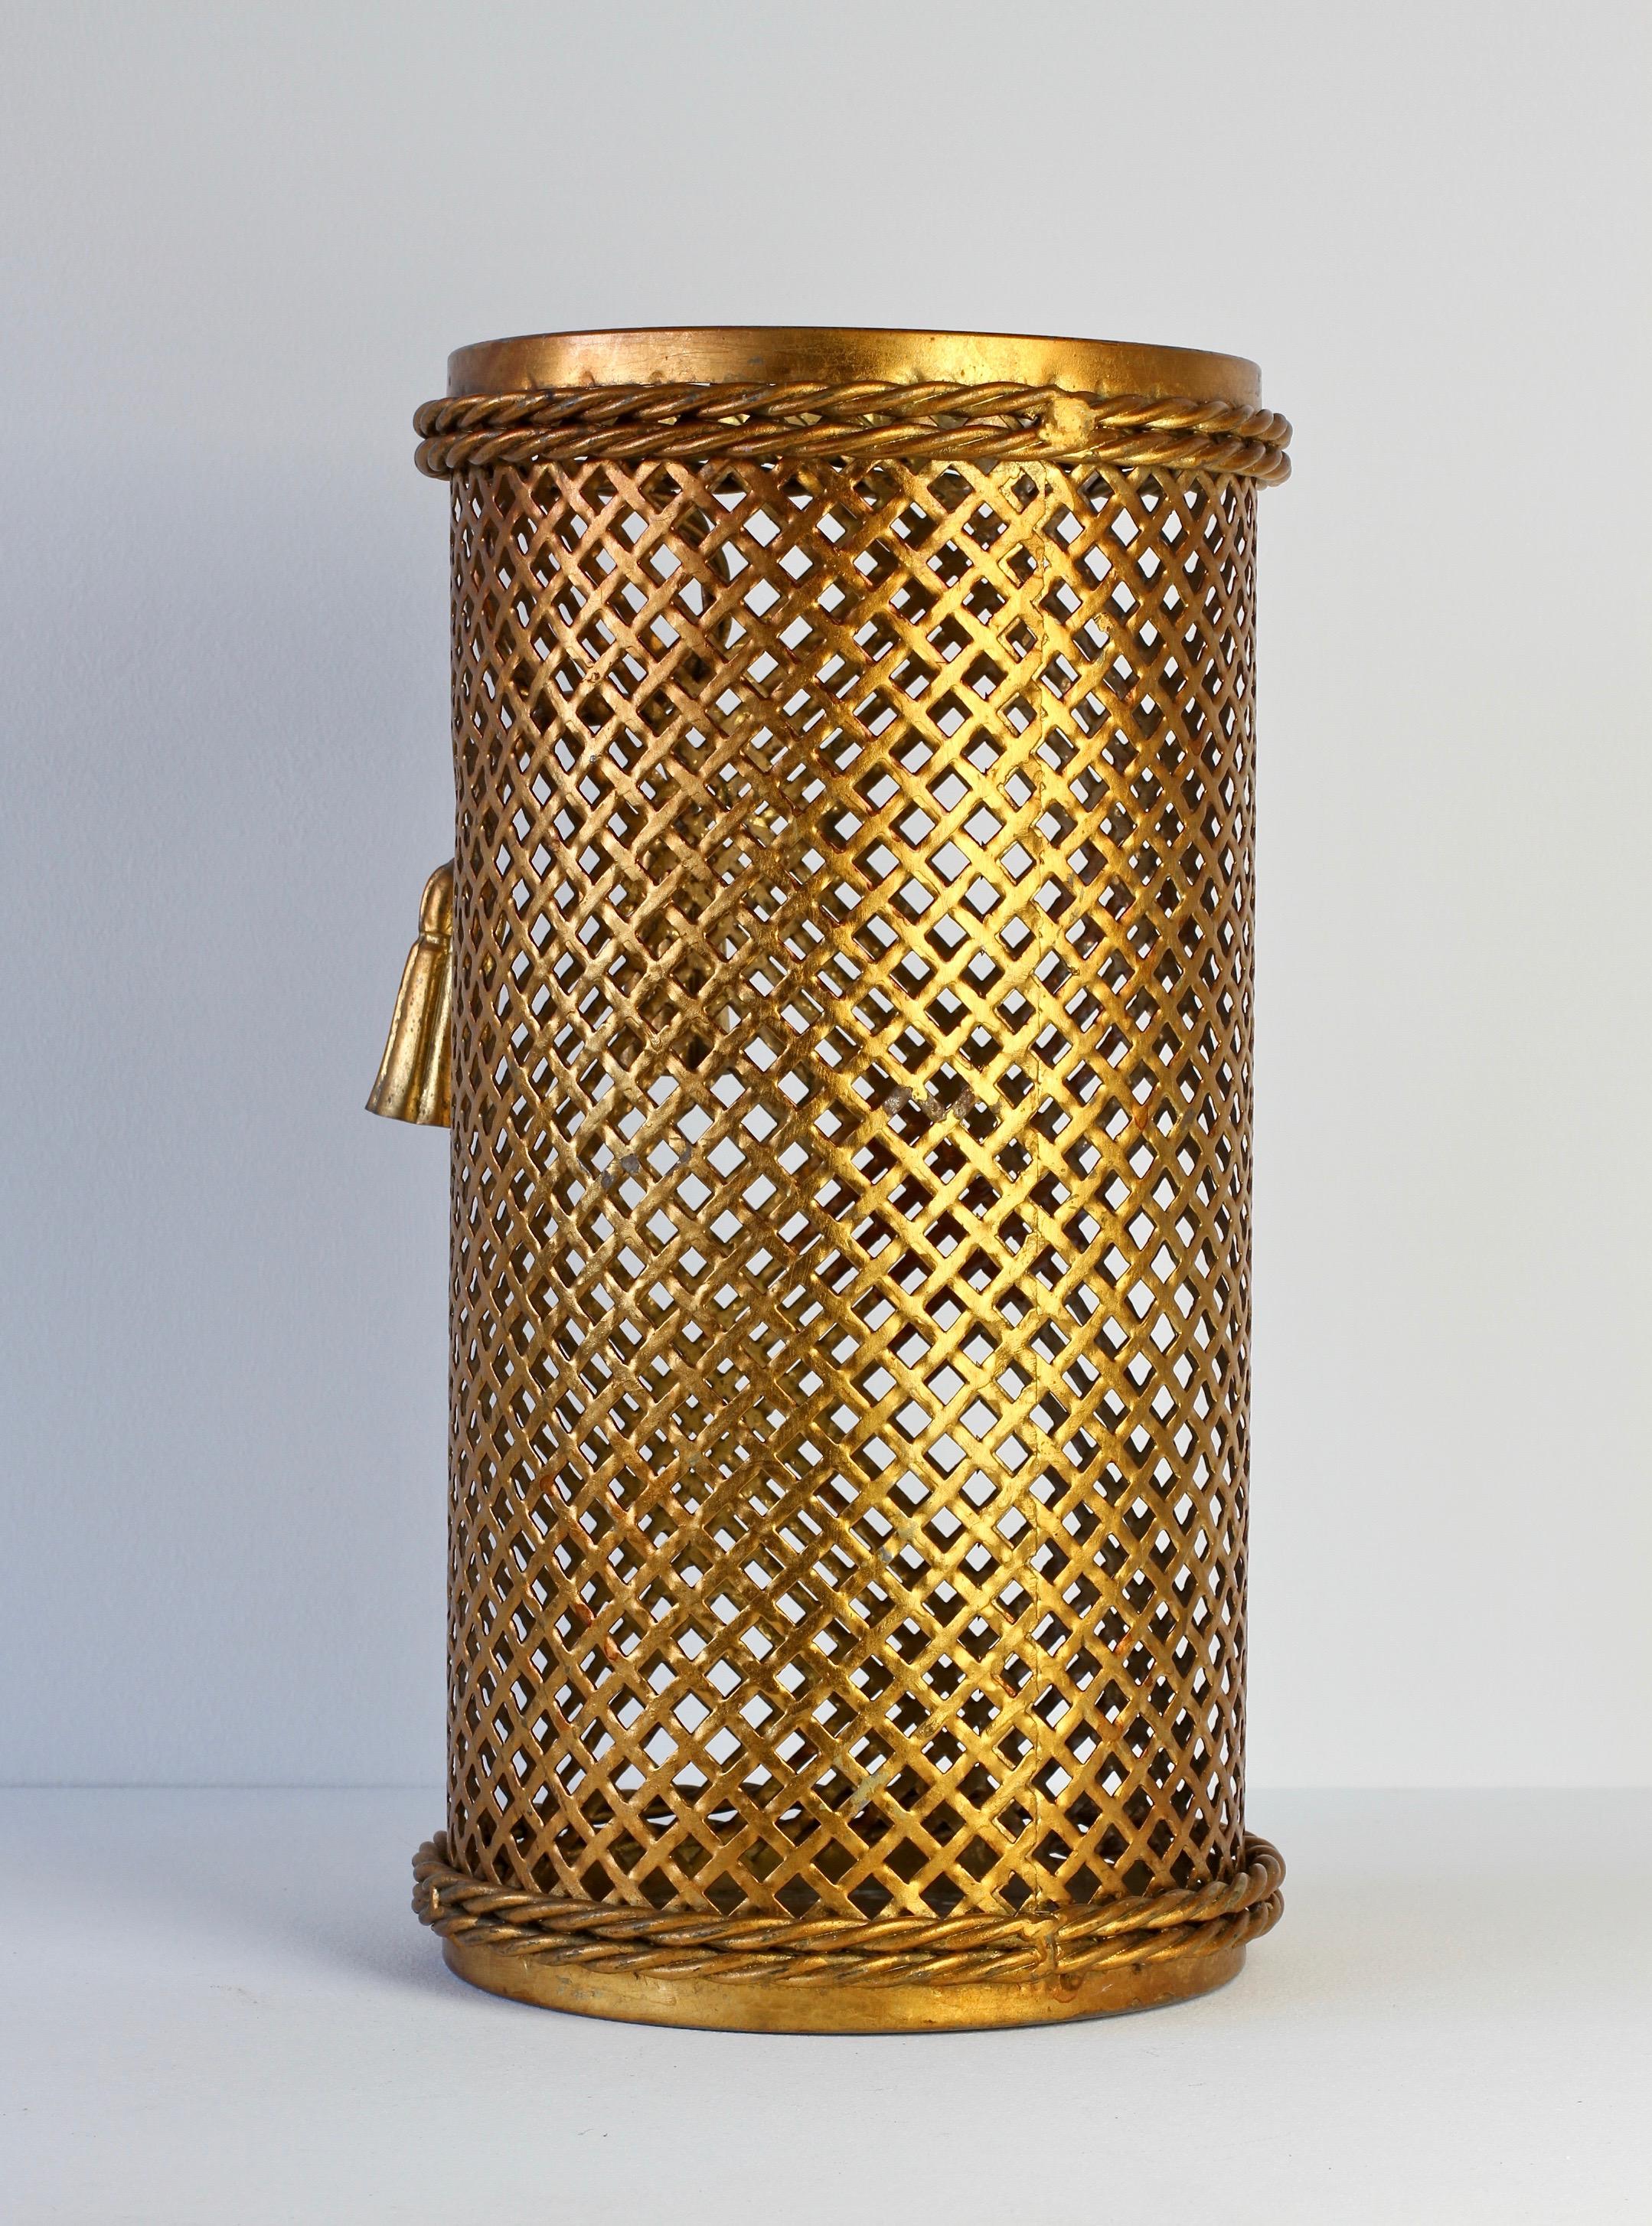 Wrought Iron 1950s Italian Hollywood Regency Gold Gilded Umbrella Stand or Waste Paper Basket